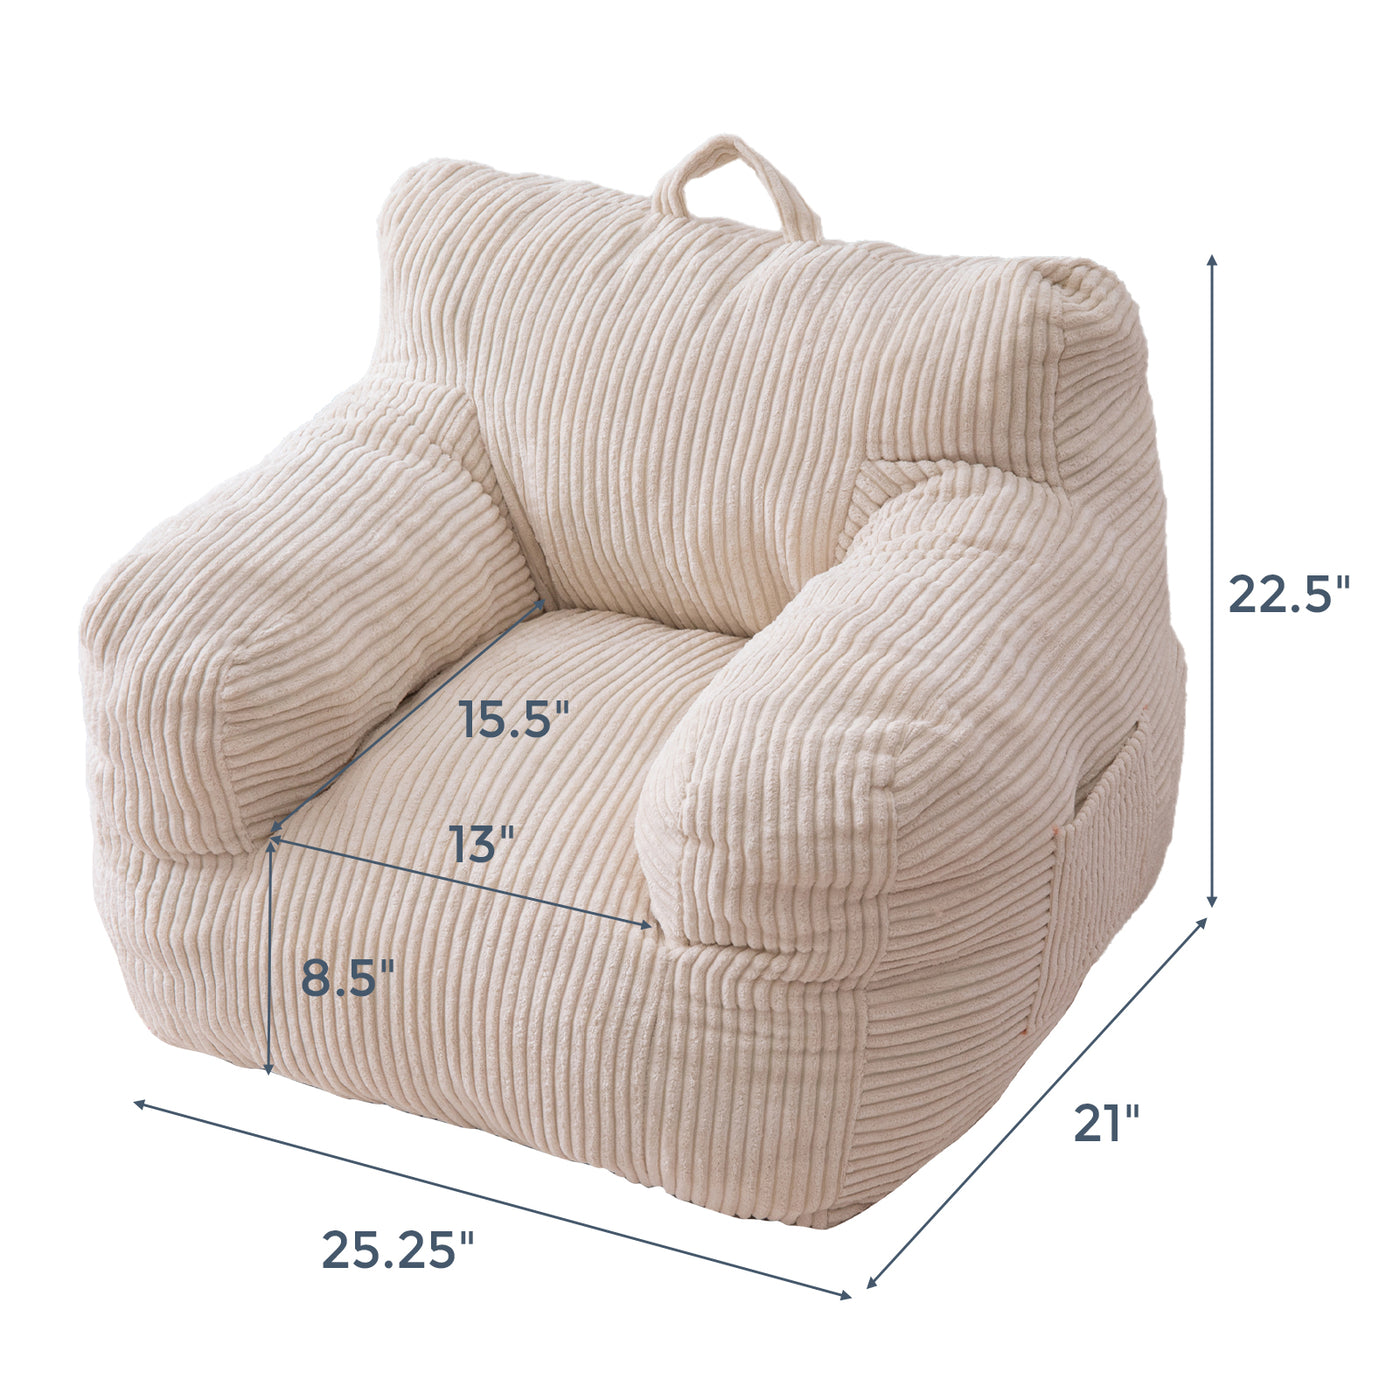 MAXYOYO Kids Bean Bag Chair, Corduroy Bean Bag Couch with Armrests for Children's Room (White)